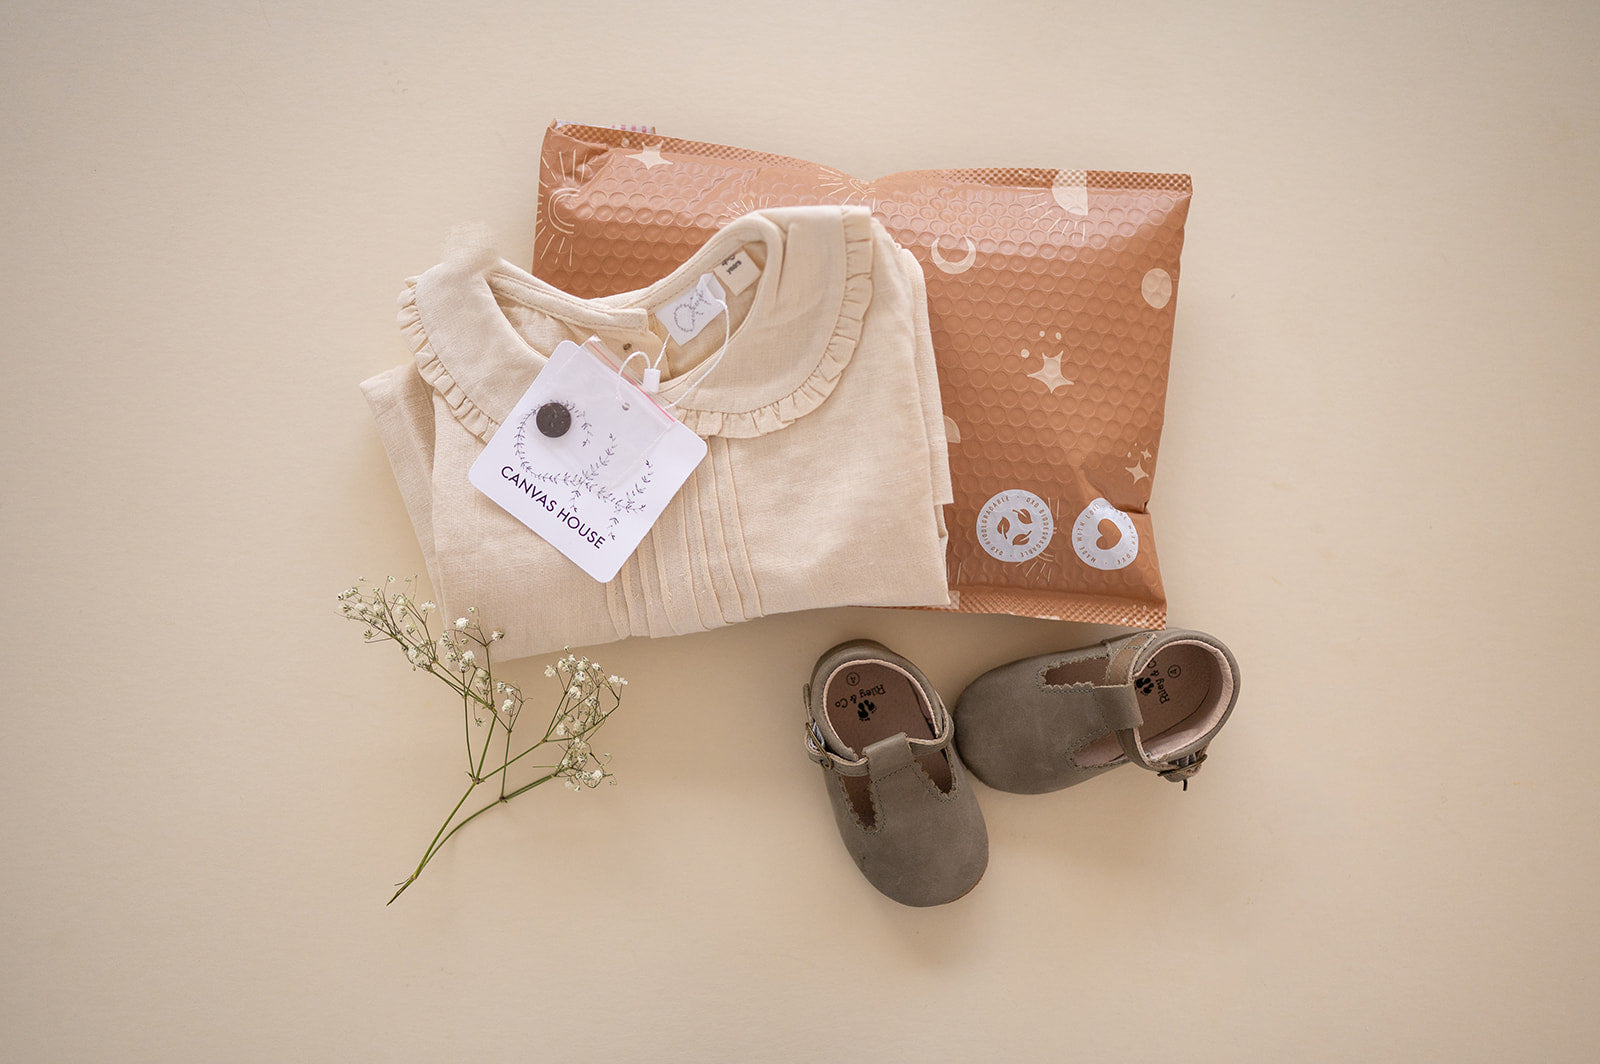 A baby's clothes and shoes are laid out on a table, while the Celestial Tan Biodegradable Bubble Mailers 8.5" x 12" from impack.co make it easy to pack up and send off your shipments.